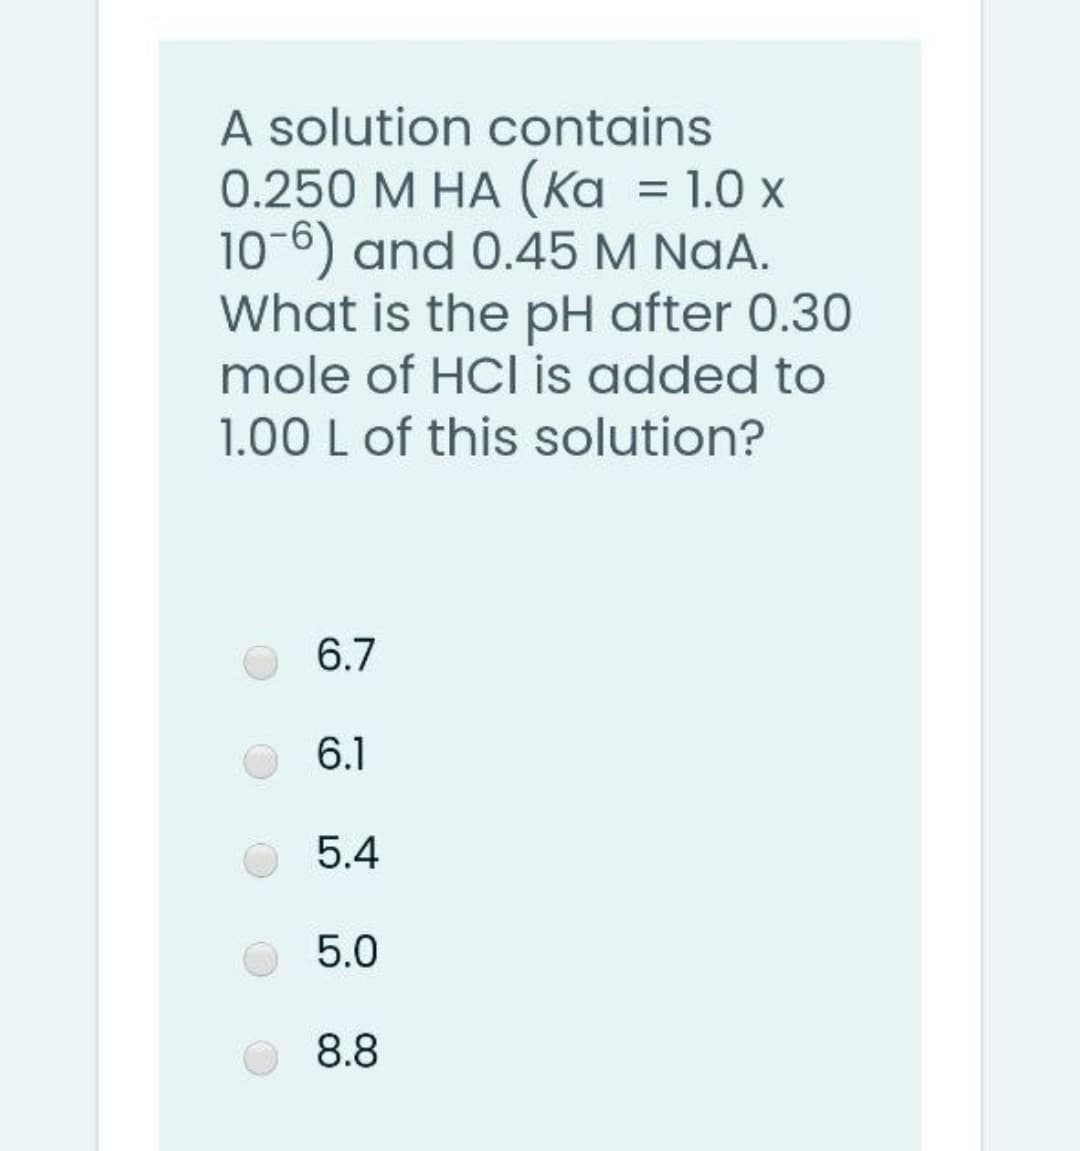 A solution contains
0.250 M HA (Ka = 1.0 x
10-6) and 0.45 M NaA.
What is the pH after 0.30
mole of HCl is added to
1.00 L of this solution?
6.7
6.1
5.4
5.0
8.8
